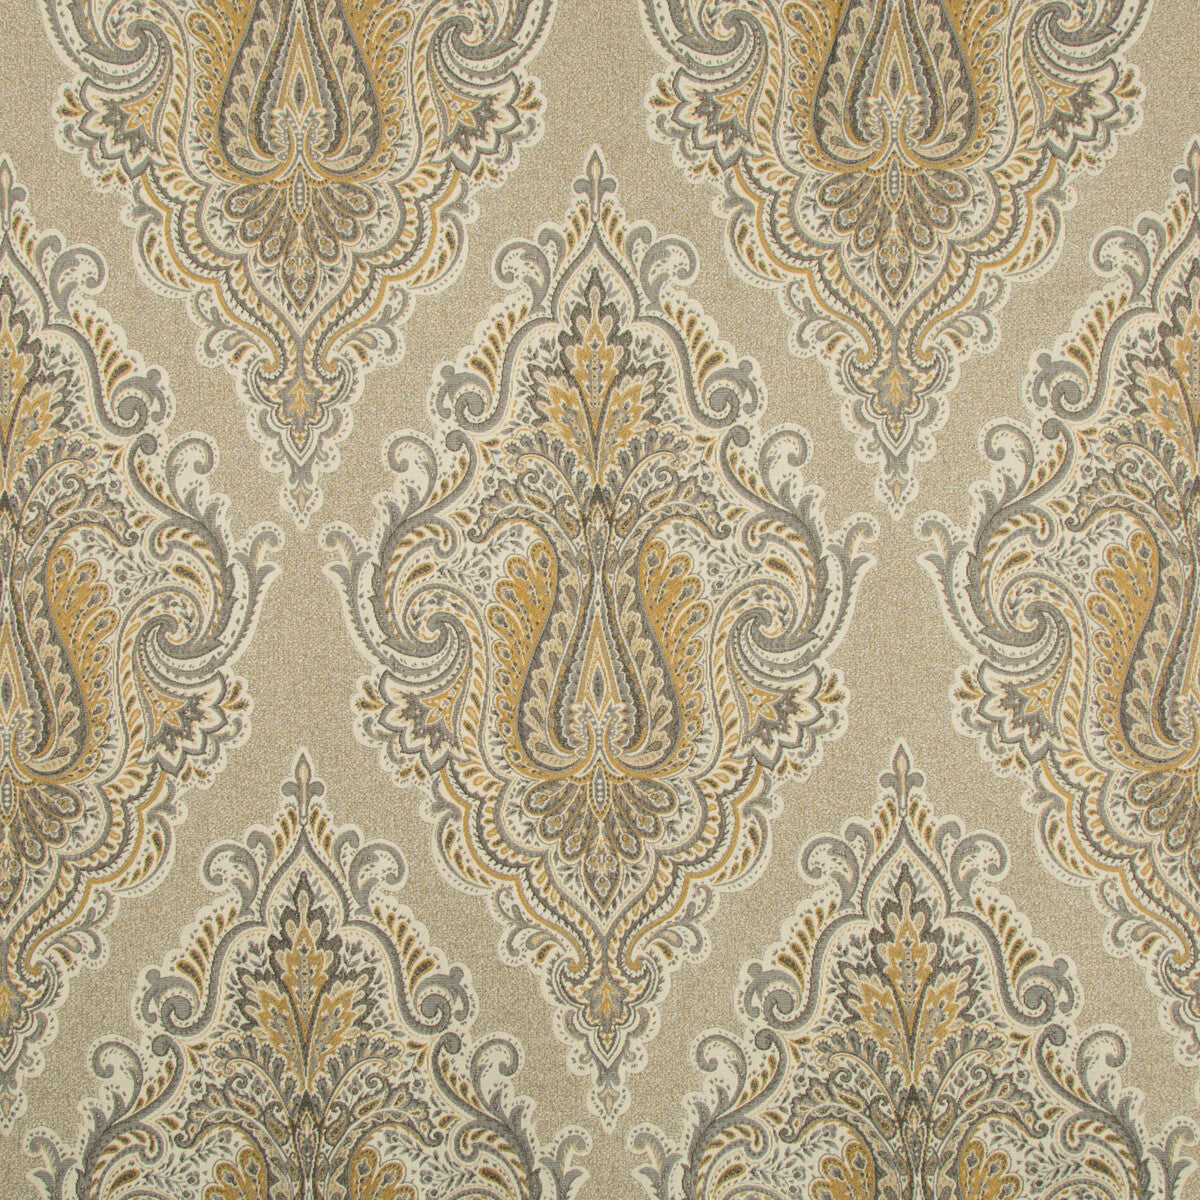 Kravet Design fabric in 34679-421 color - pattern 34679.421.0 - by Kravet Design in the Crypton Home collection